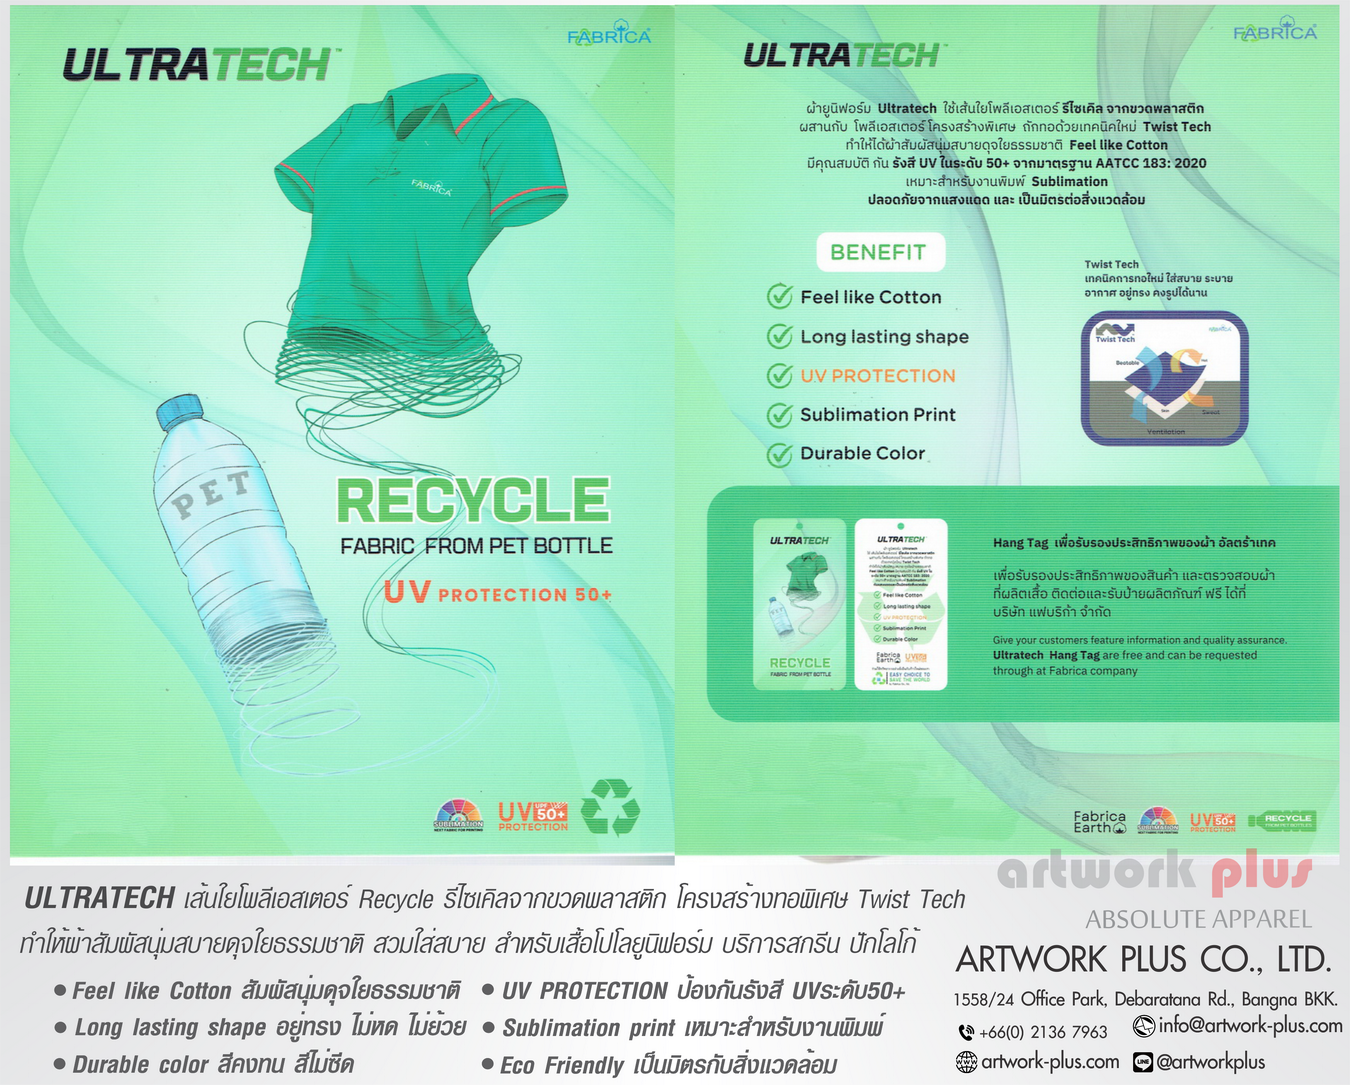 ULTRATECH-RECYCLE FABRIC_P.1_artwork plus